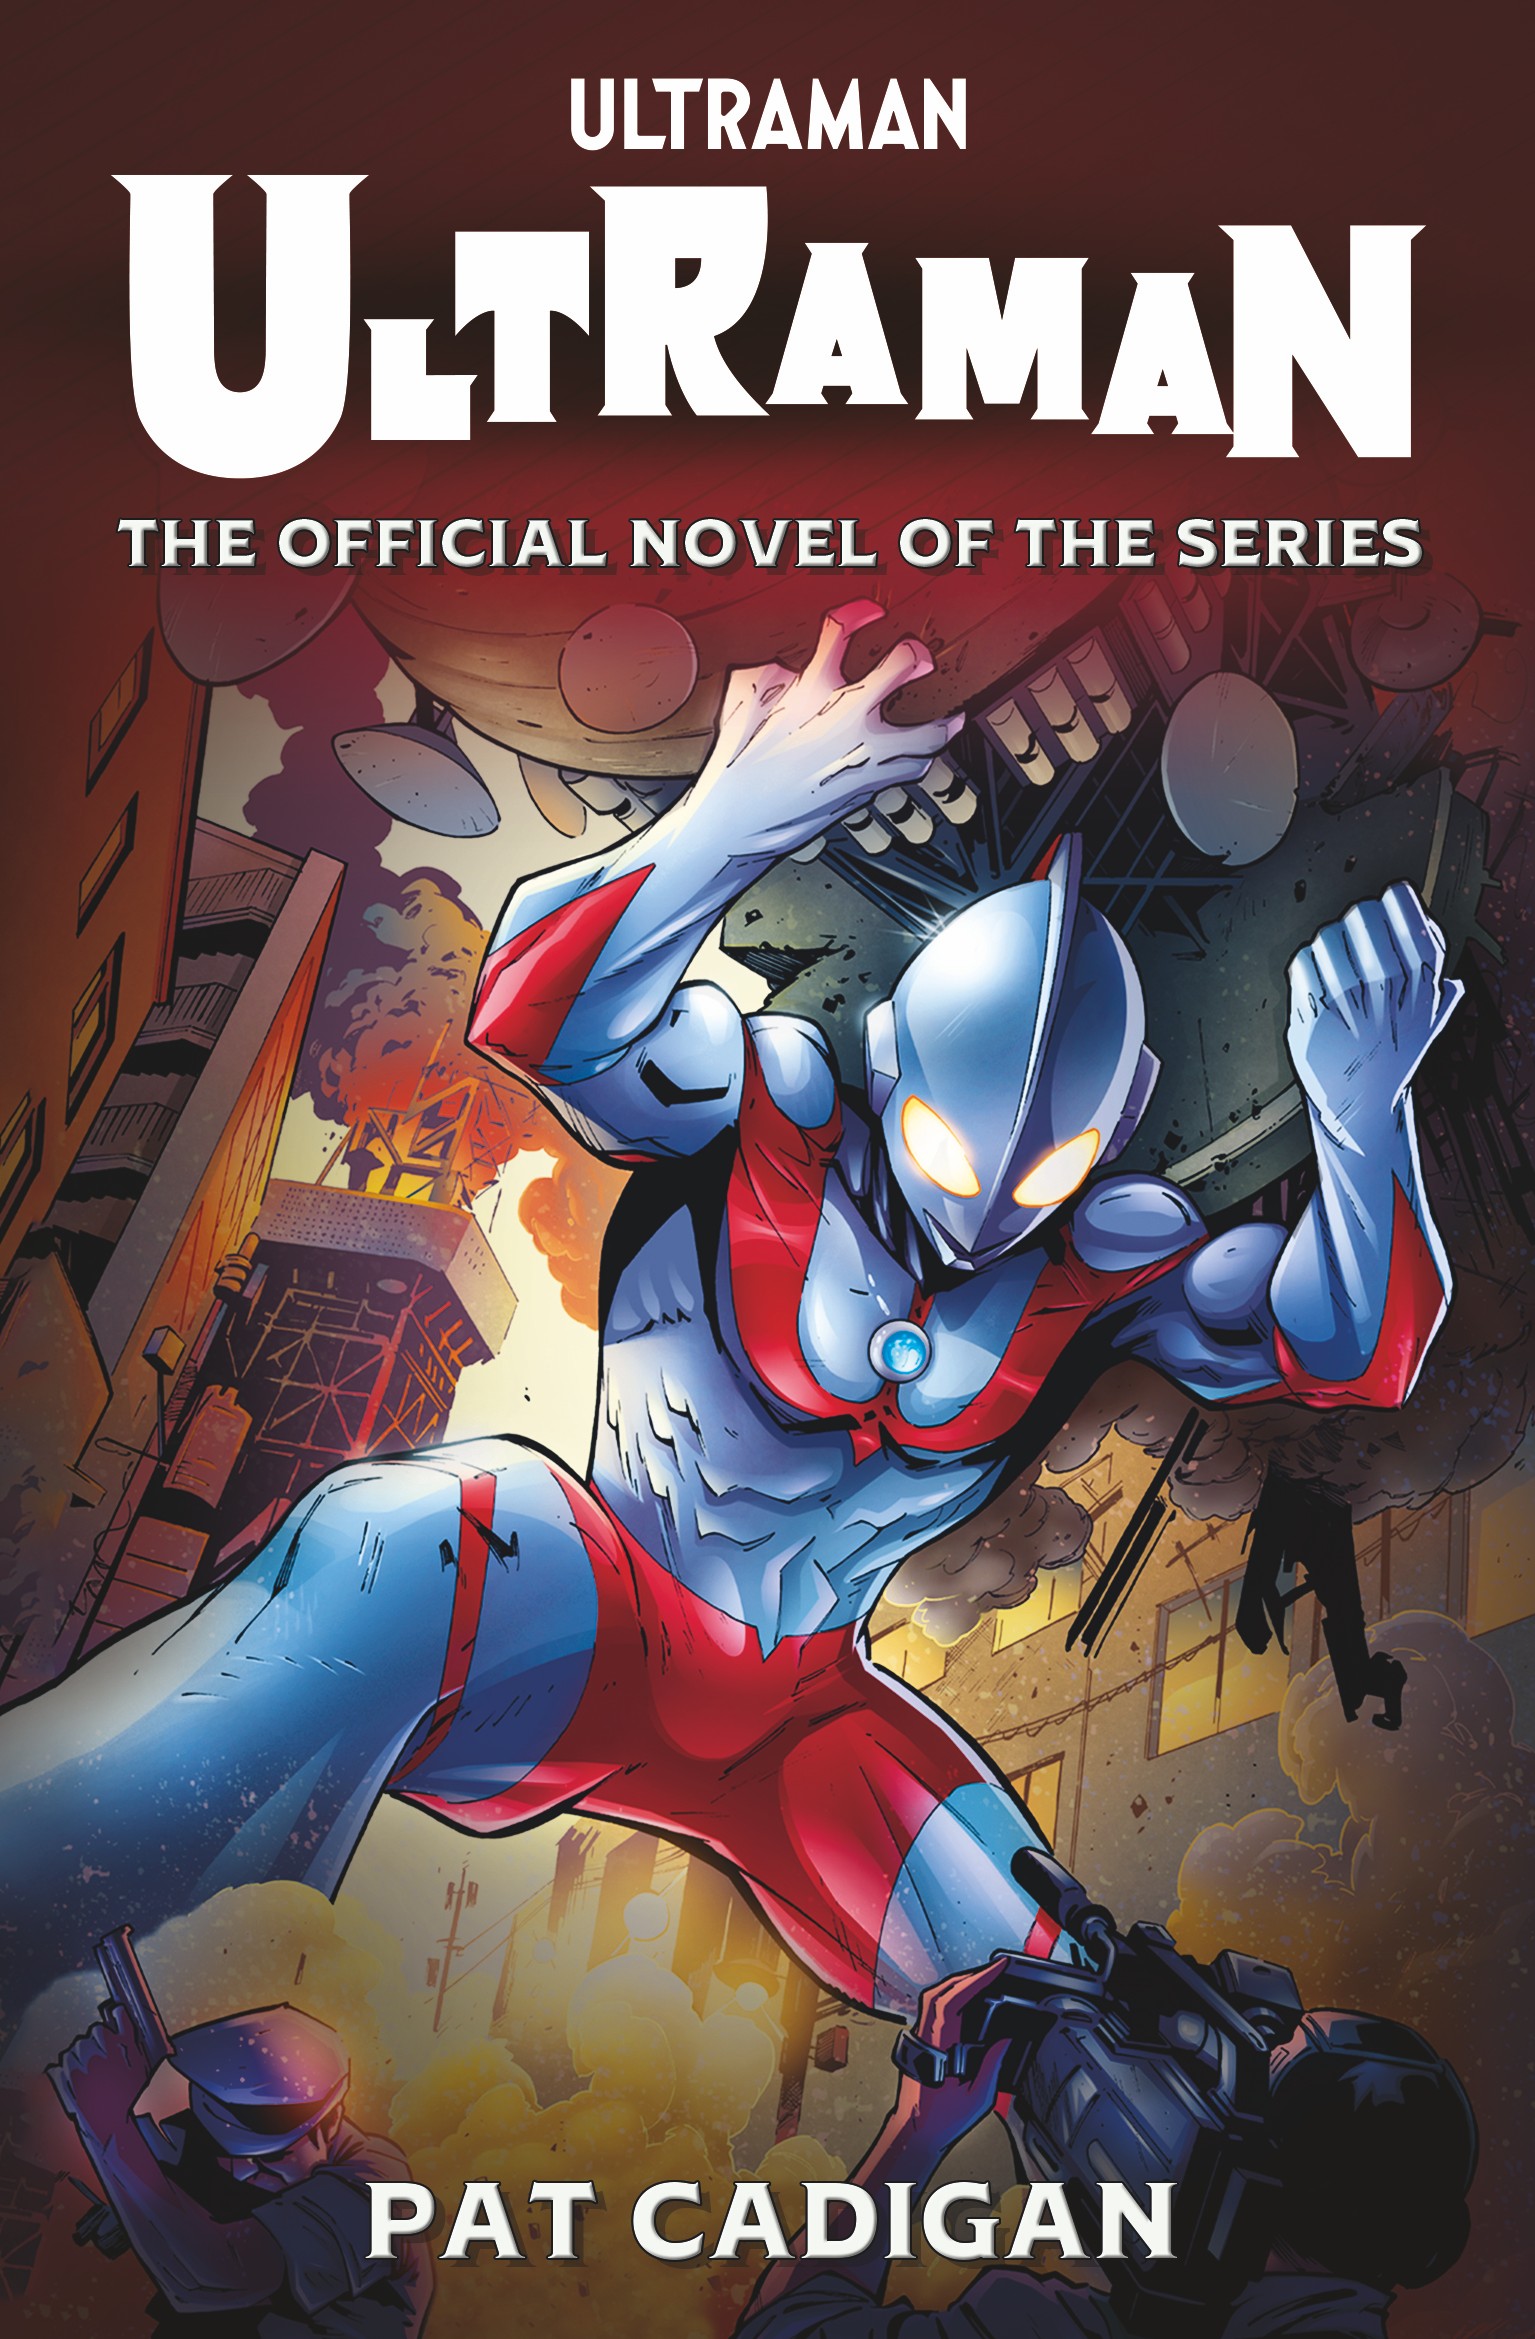 Ultraman and Ultraseven Series Novelizations Coming From Titan Books